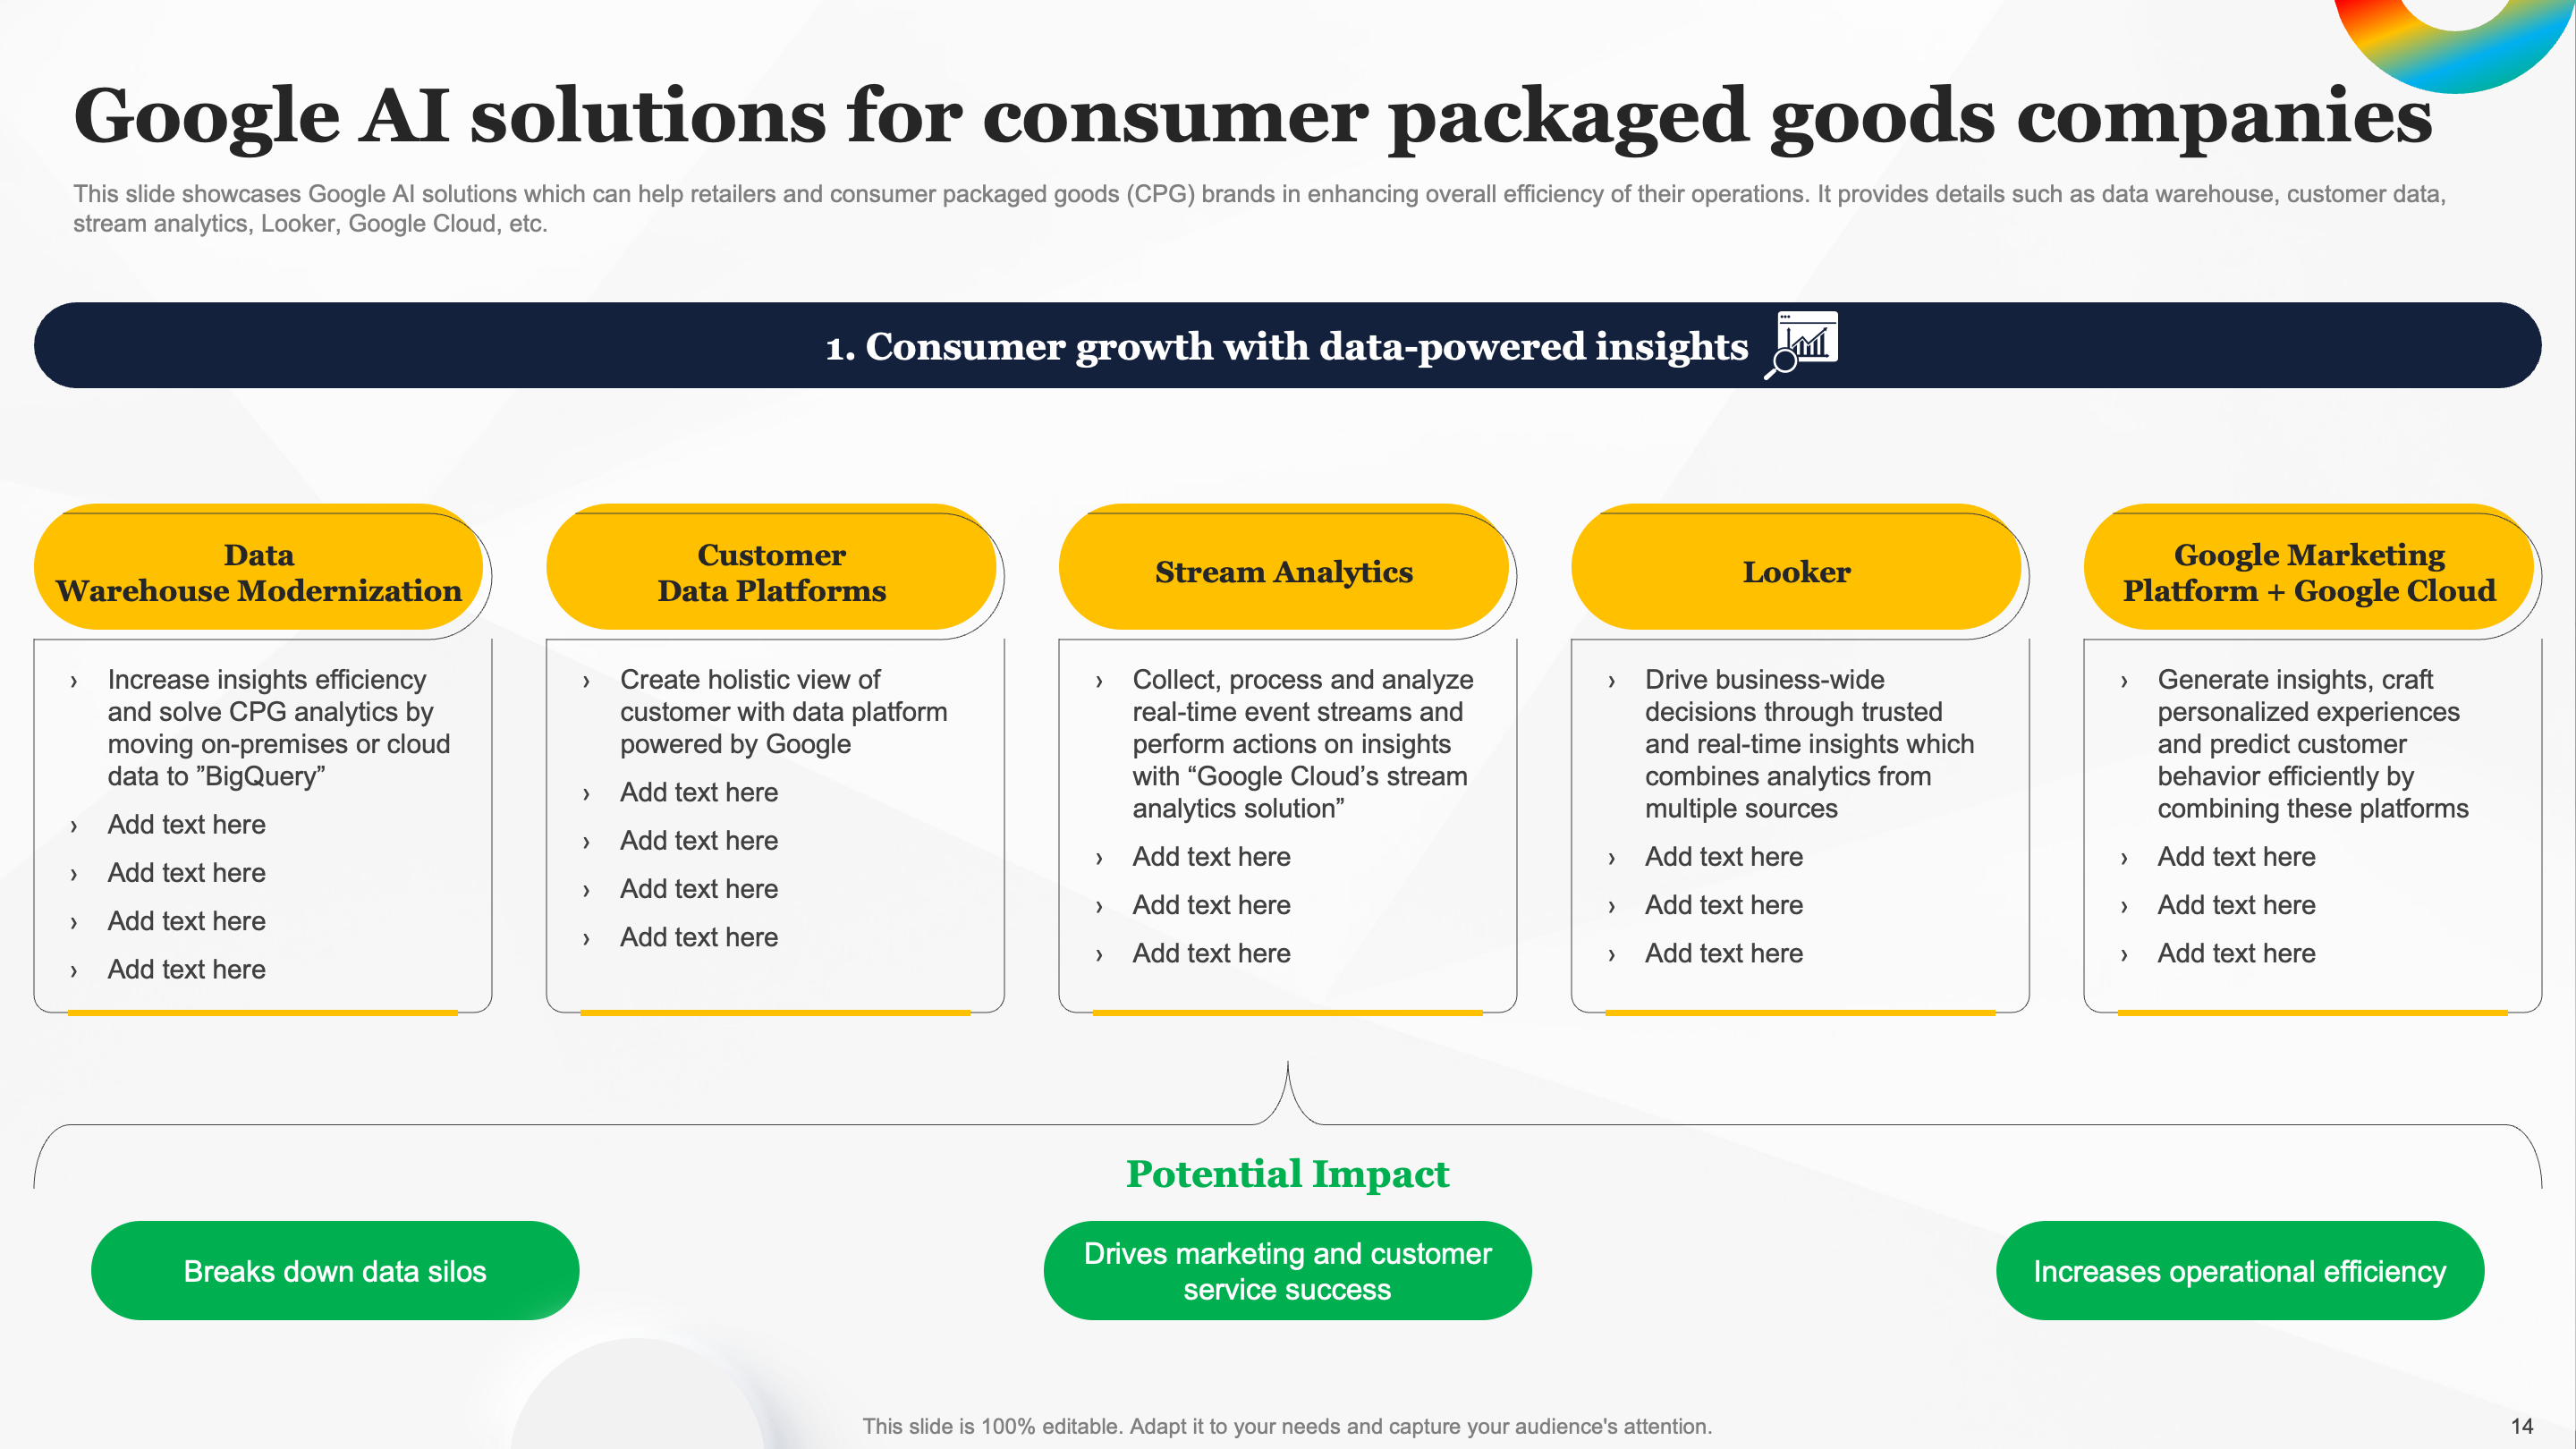 Google AI Solutions for Consumer Packaged Goods Companies